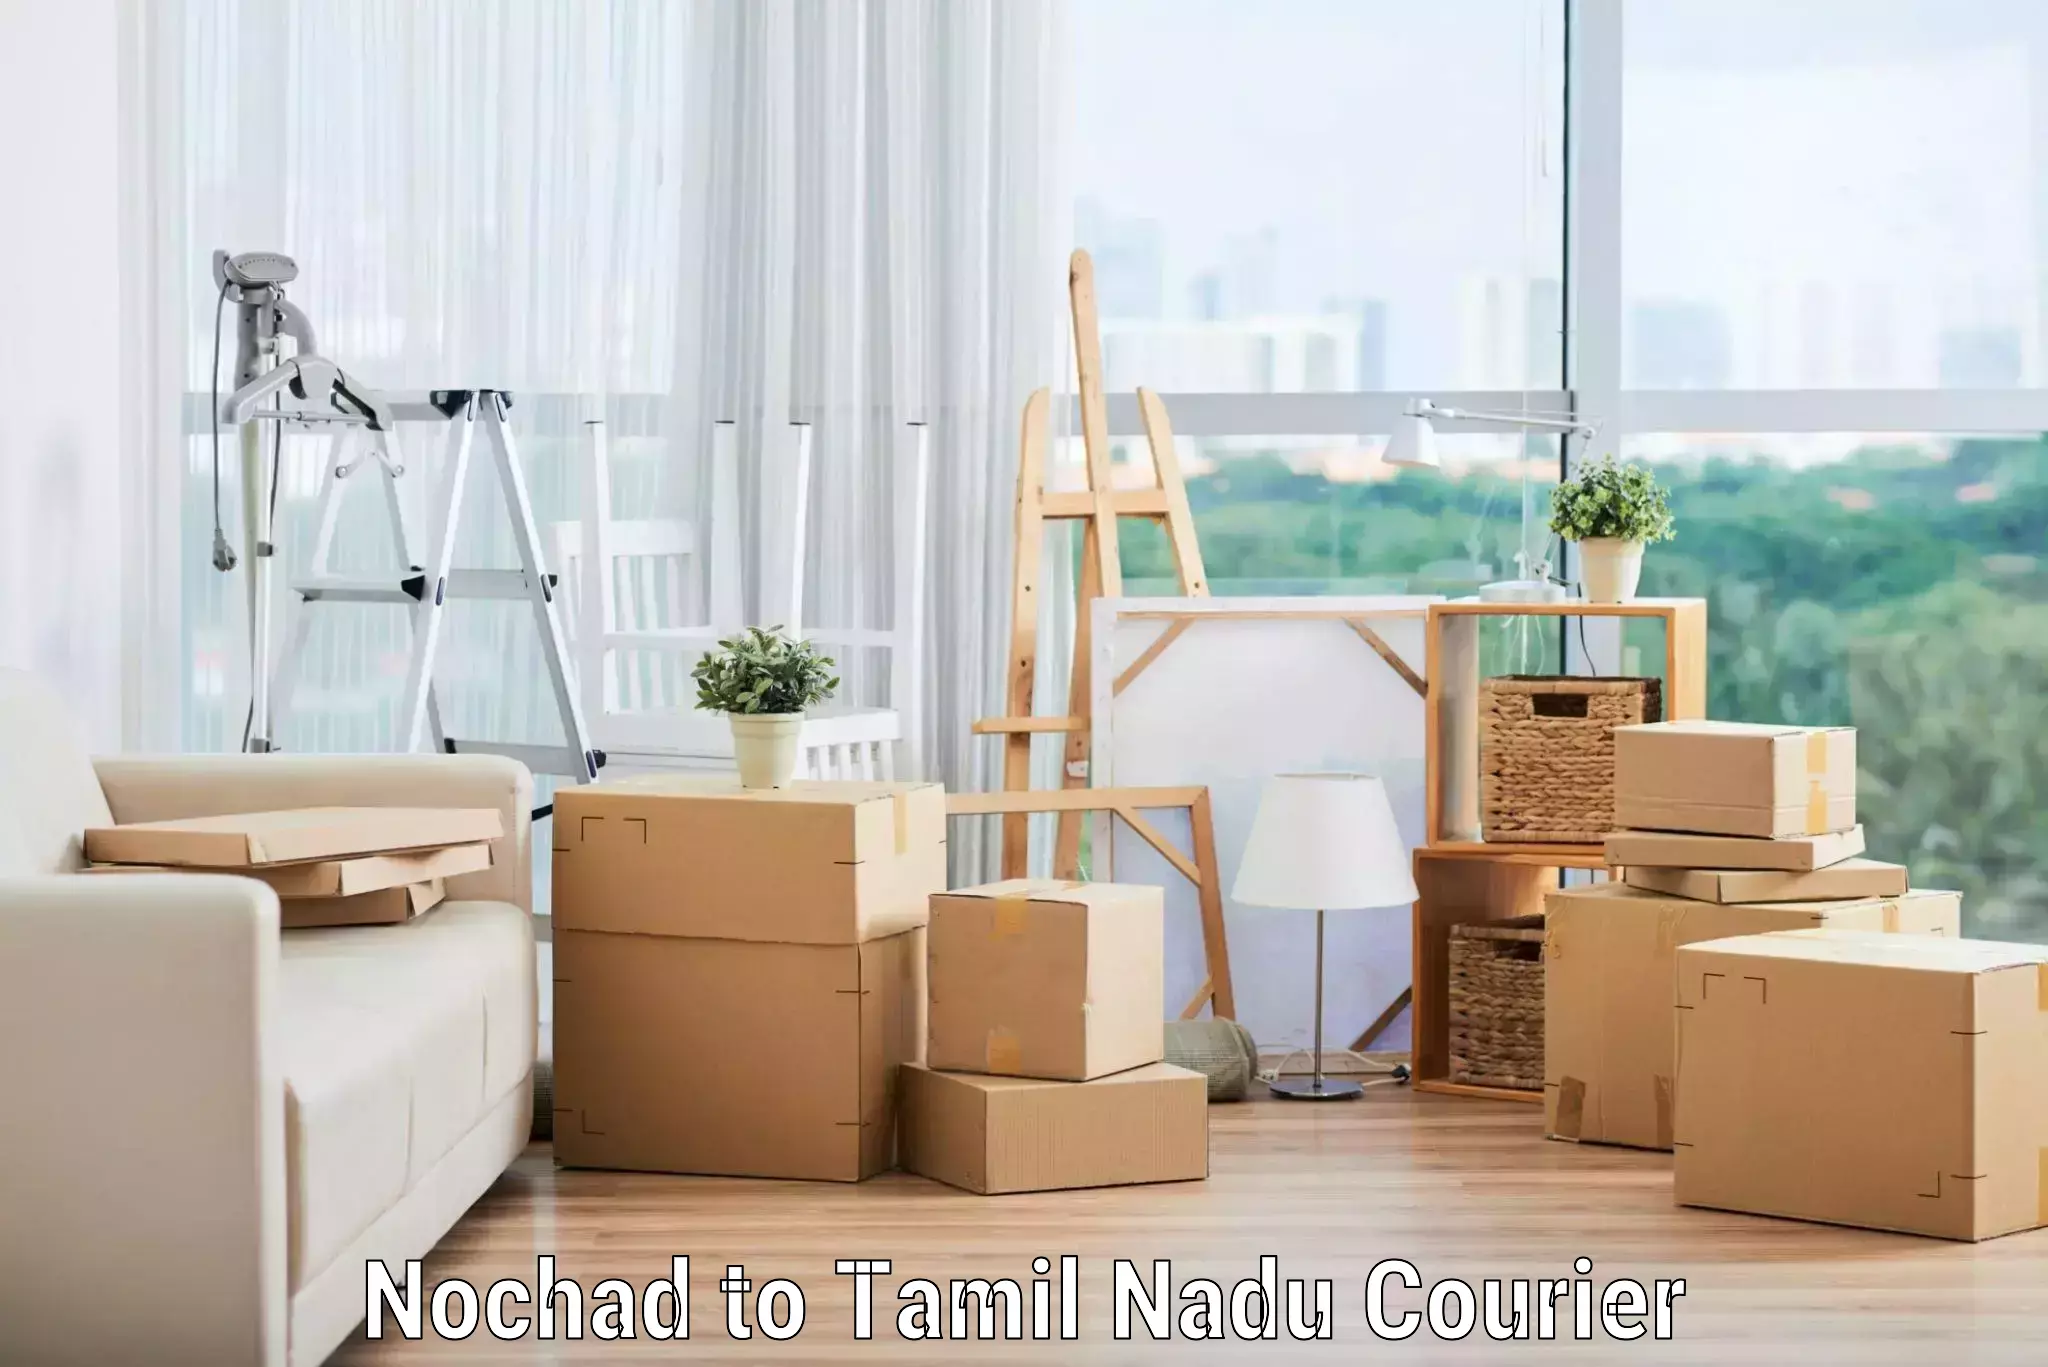 Packing and moving services Nochad to Kanchipuram